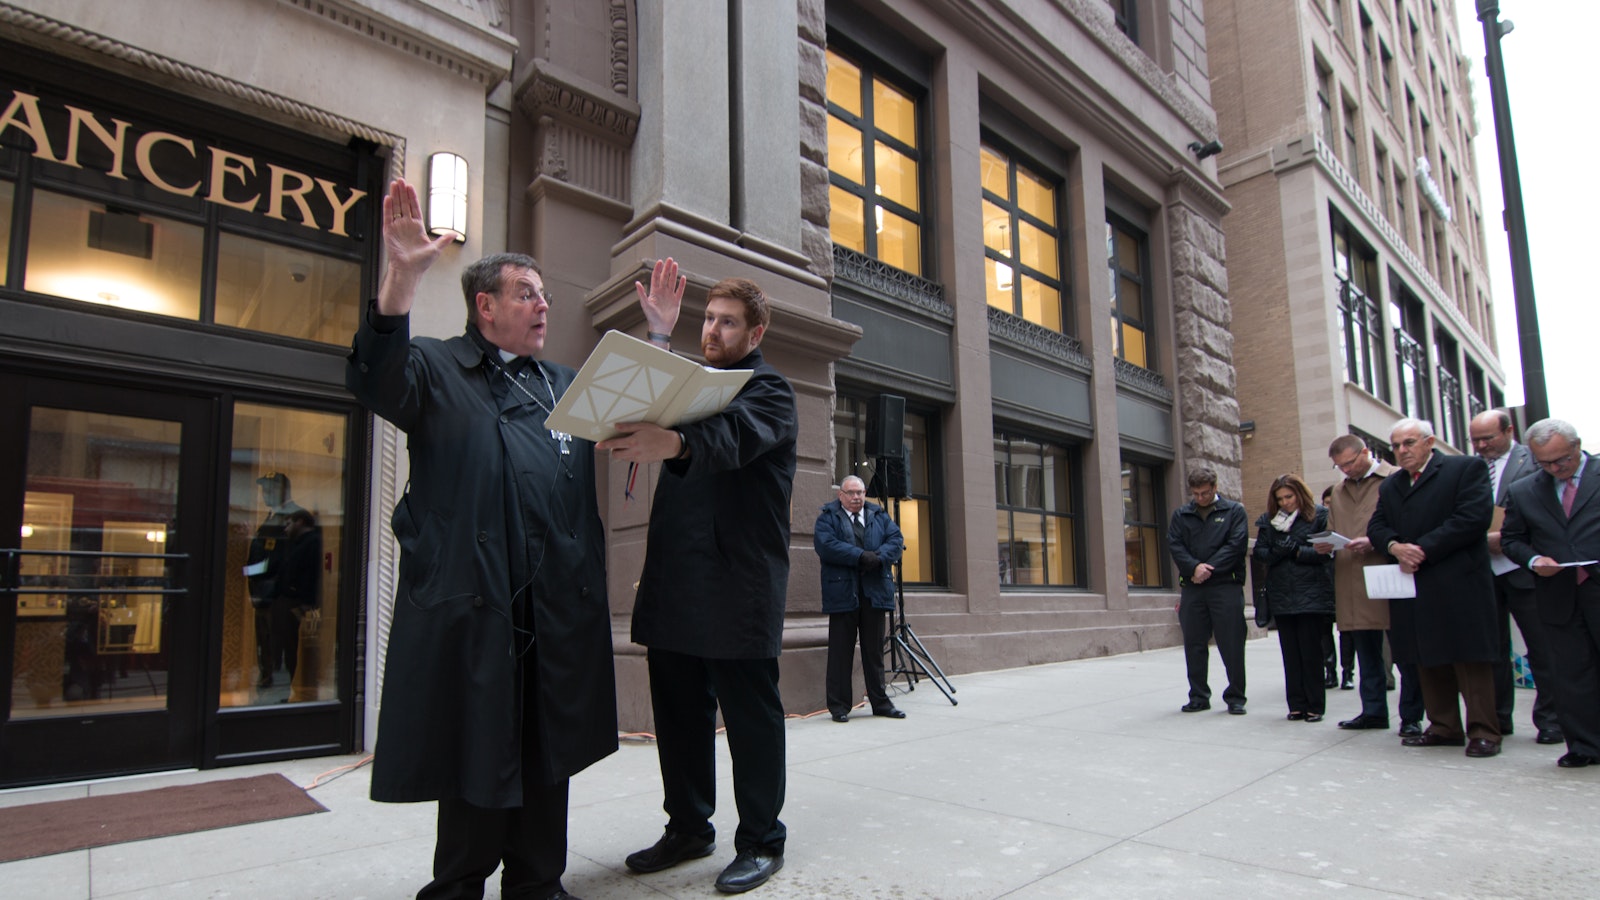 Archbishop Vigneron blesses a new tympanum commissioned for the archdiocesan Chancery in downtown Detroit on Dec. 1, 2016. In 2015, the archbishop led a move from the archdiocese's former Chancery on Washington Boulevard to its new location on State Street, keeping the archdiocese's central headquarters in downtown Detroit. (Jonathan Francis | Detroit Catholic file photo)